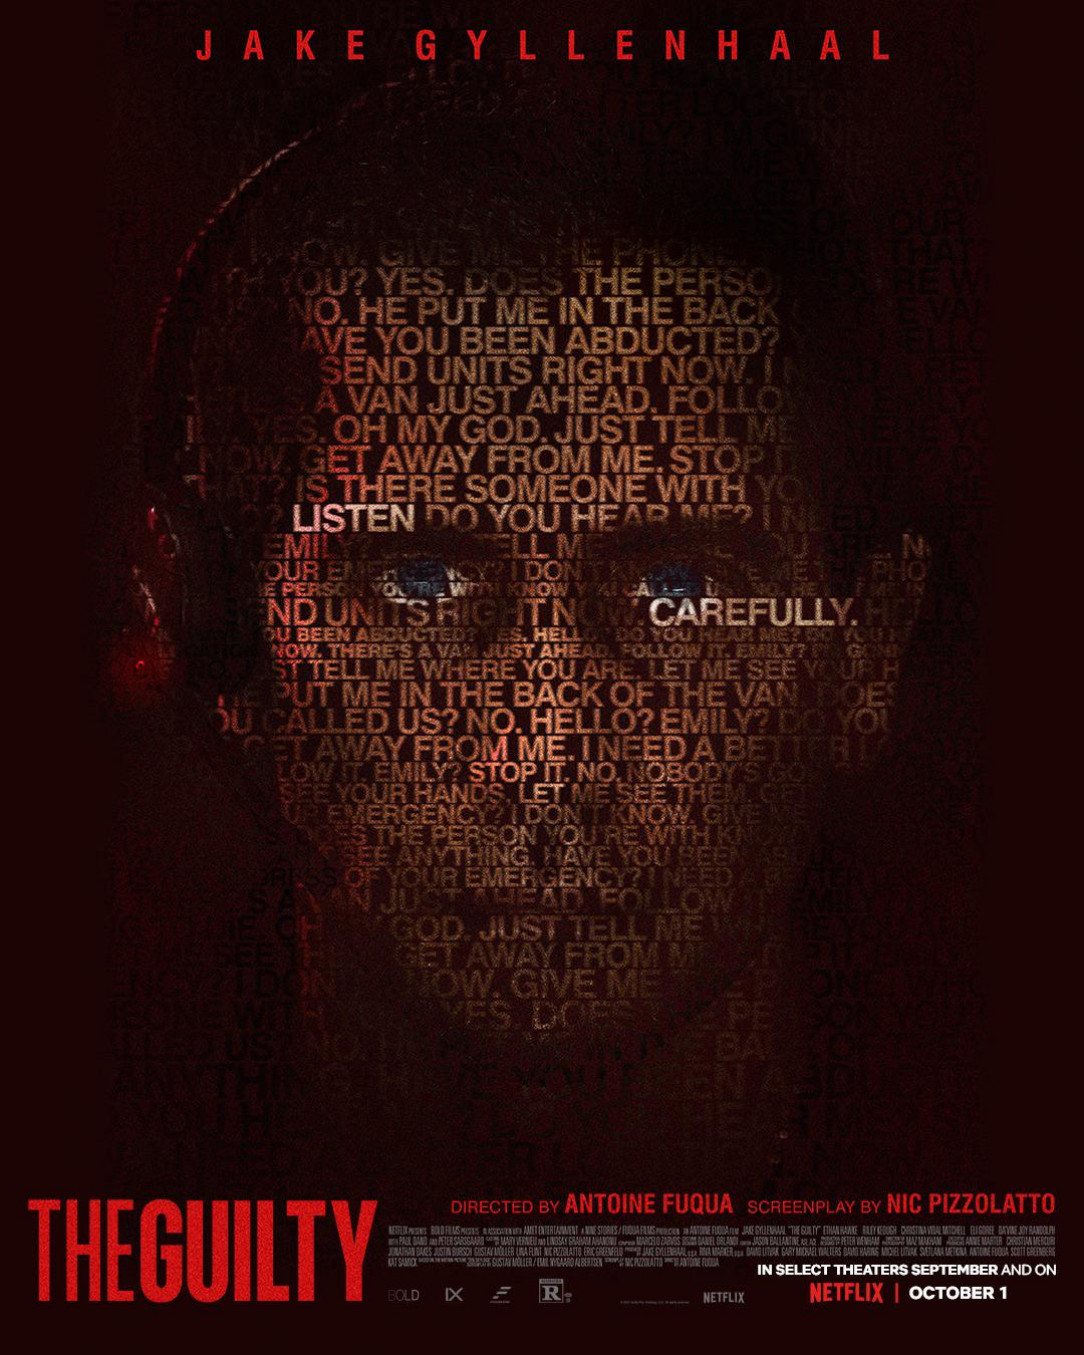 Official poster for “The Guilty” starring Jake Gyllenhaal directed by Antoine Fuqua